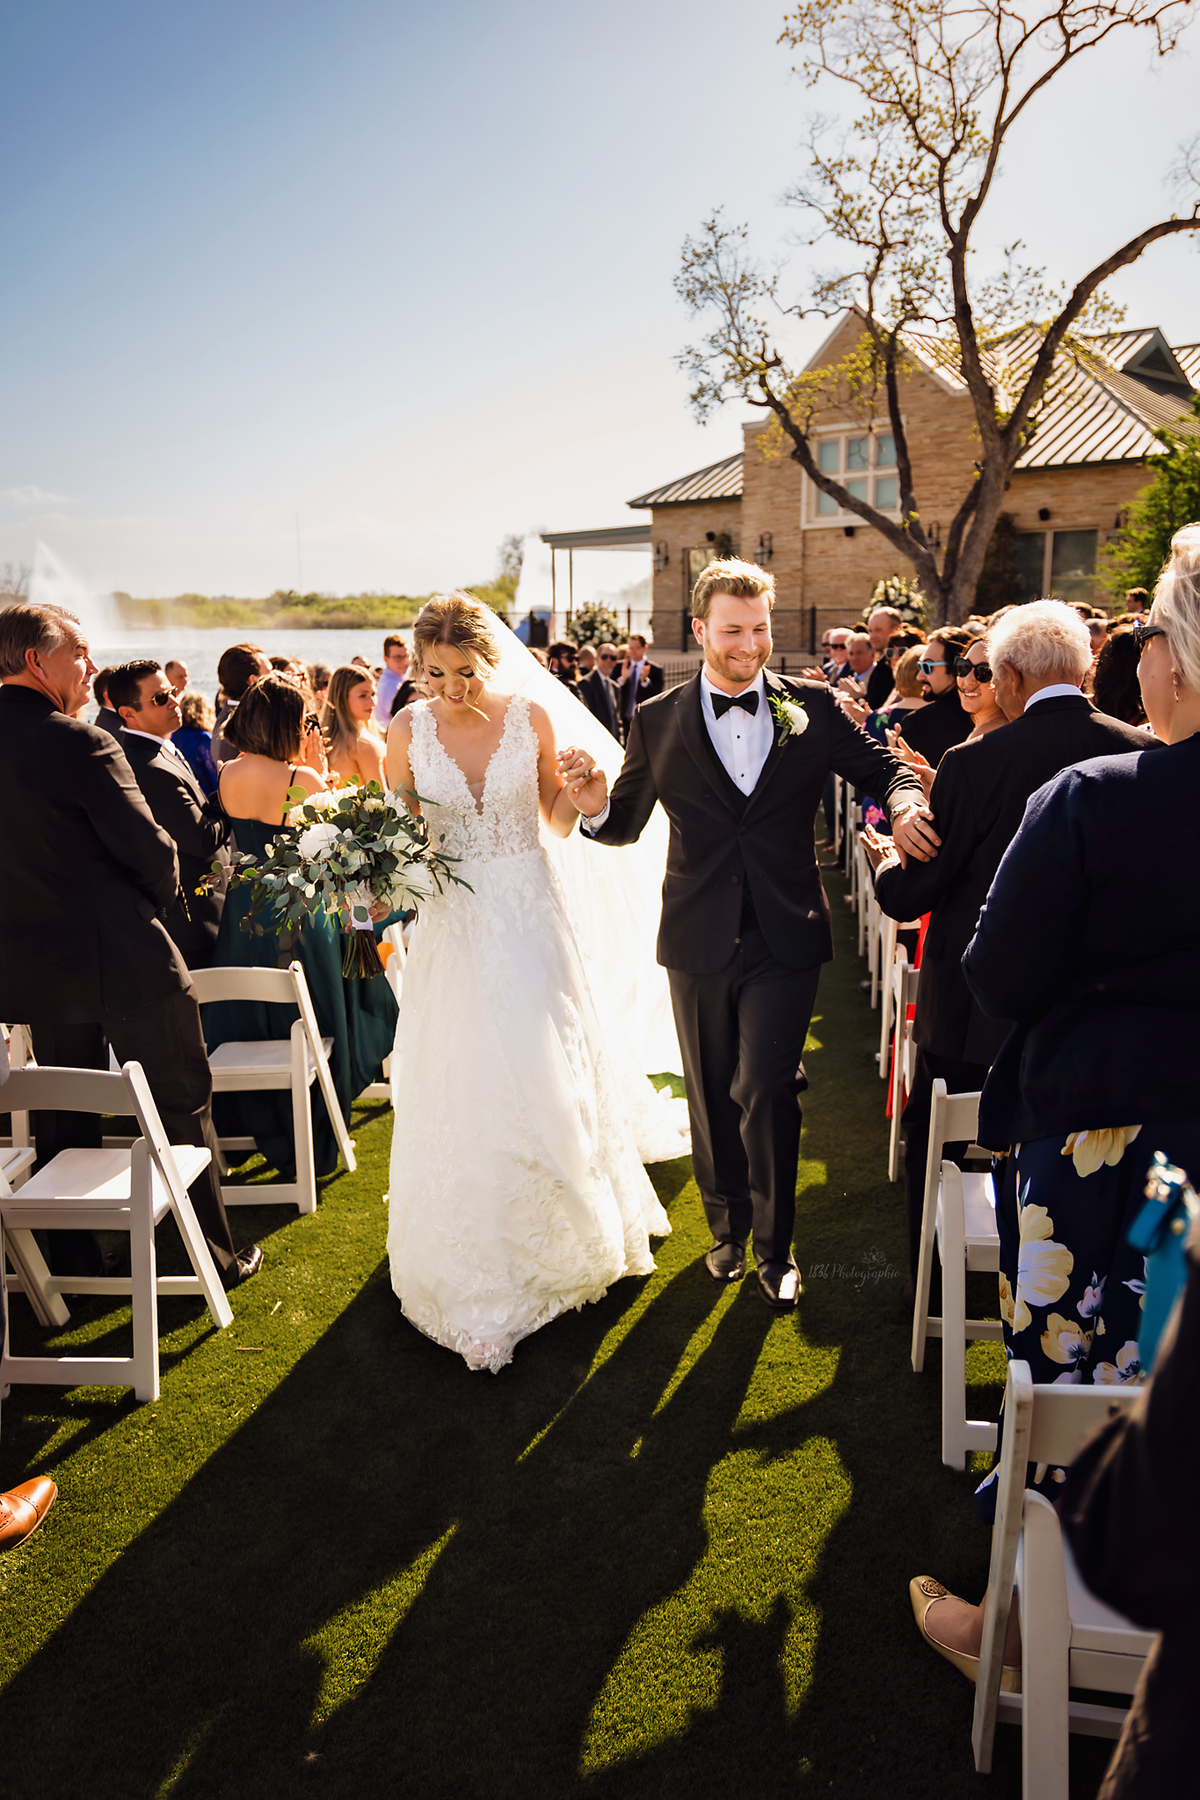 Immerse in lakeside luxury at Red Berry Estate. Couture gowns, tuxes, lush florals, and a packed dance floor – the epitome of high-end wedding perfection.